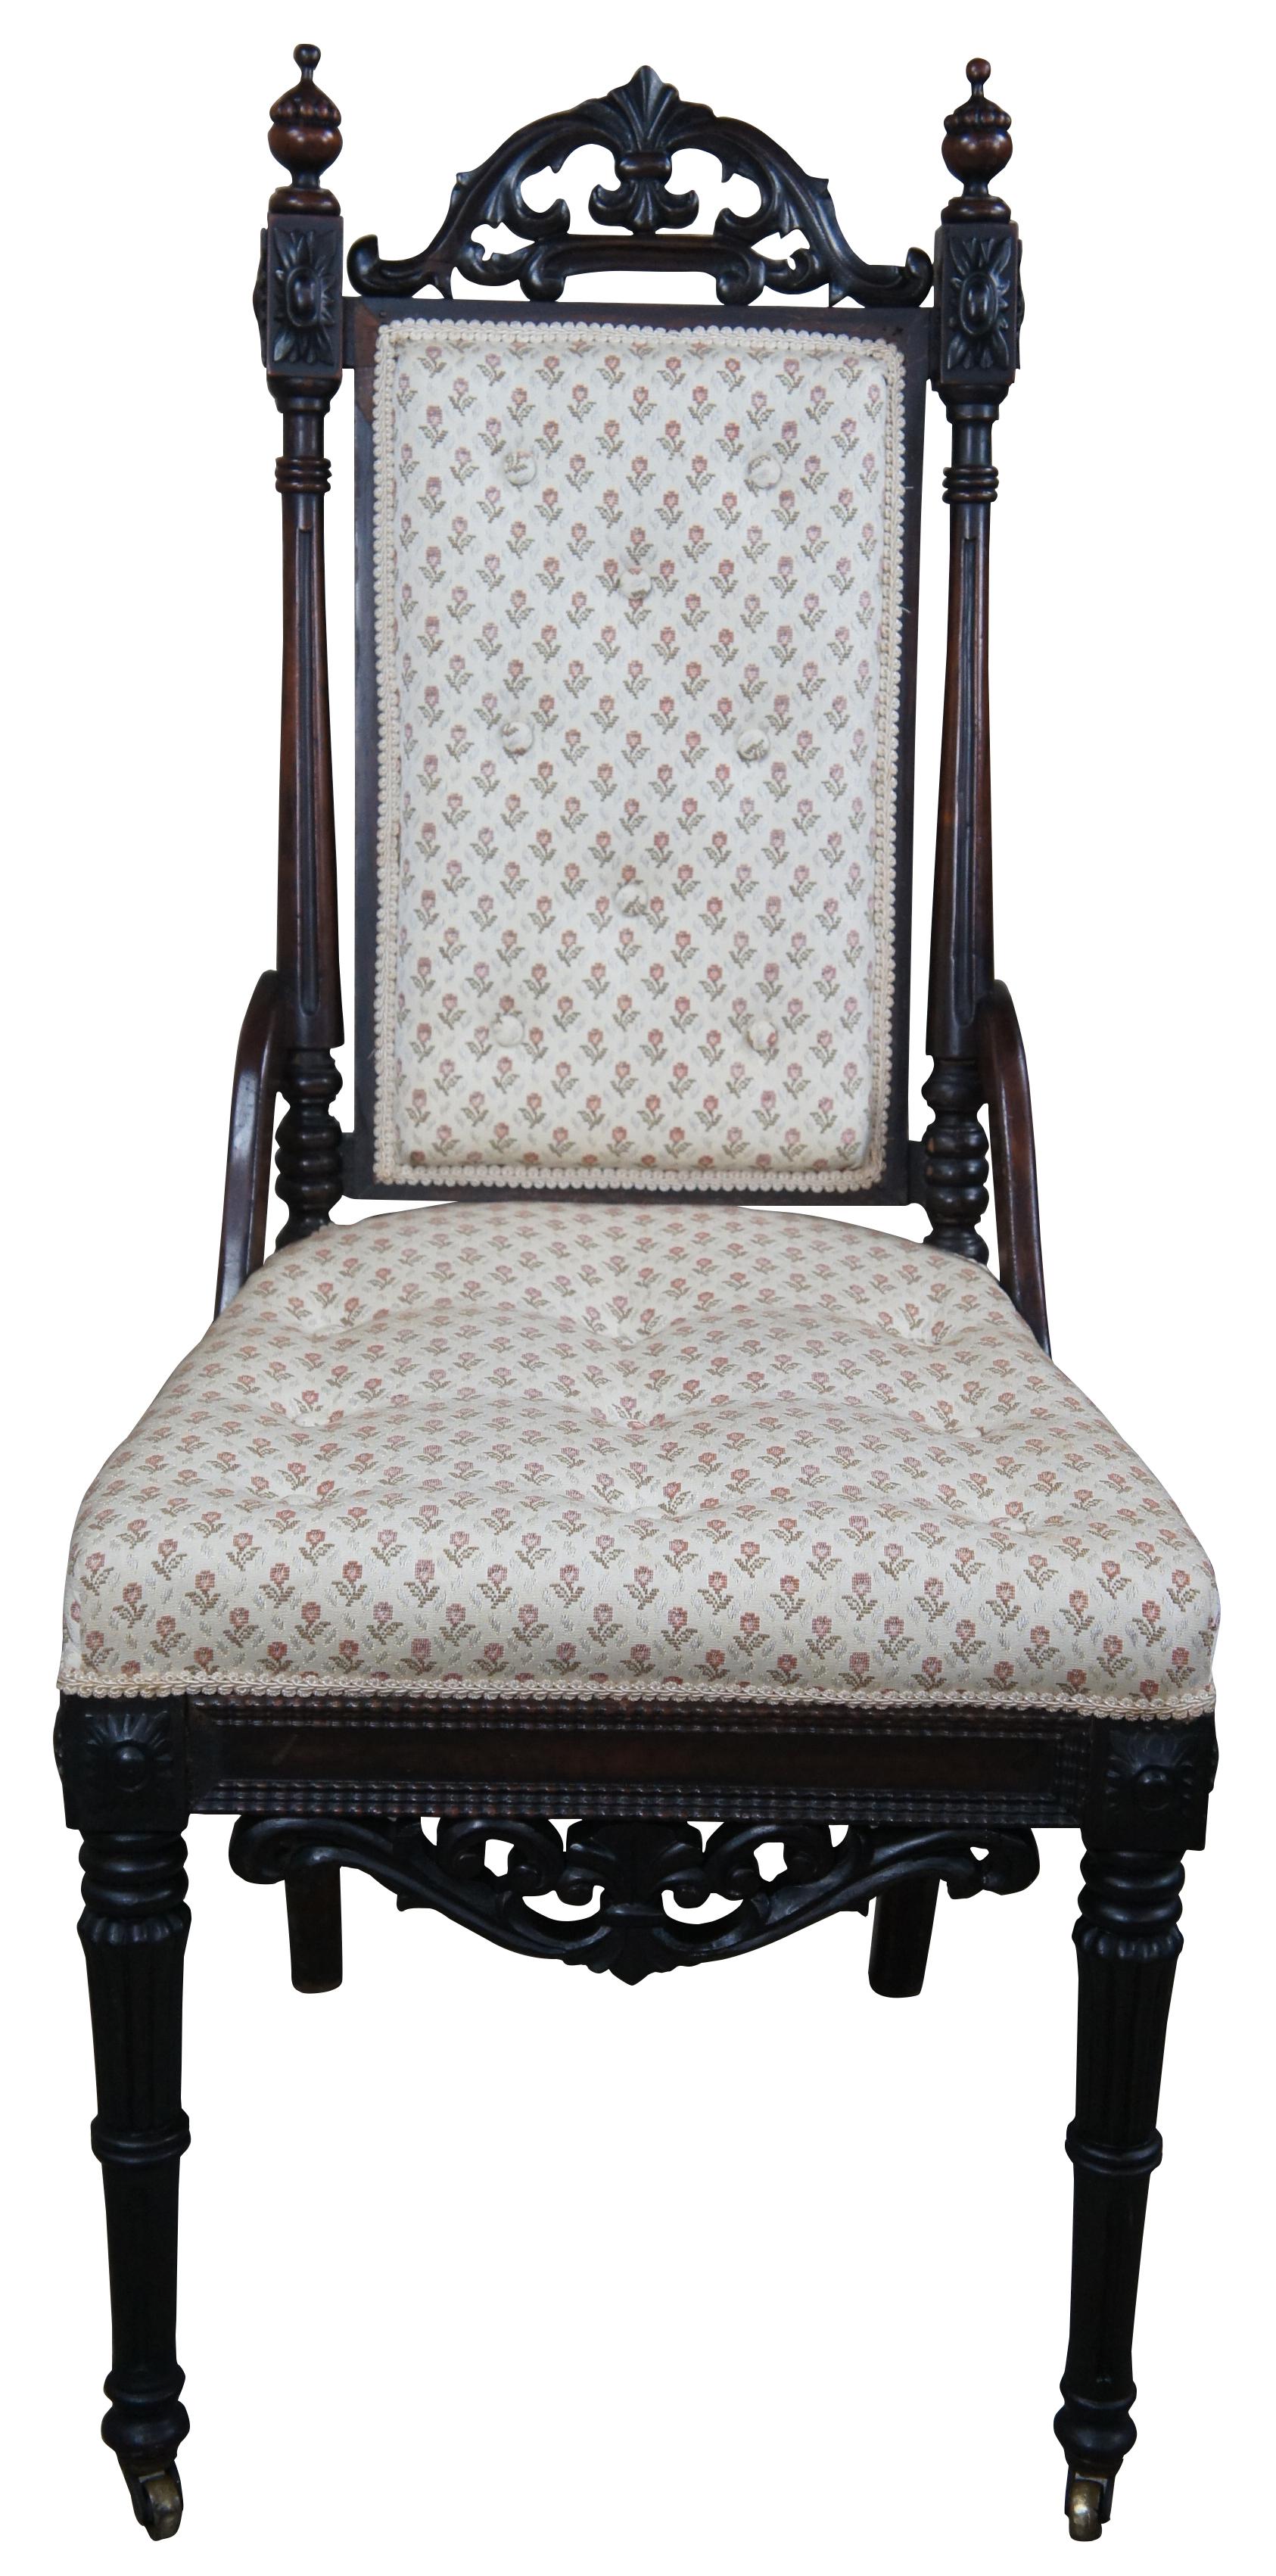 Victorian era Gothic side chair. Drawing inspiration from Charles II and French Renaissance Revival. Made from walnut with a pierced and carved Fleur crest set between carved block medallions and spire shaped finials. The chair features turned and